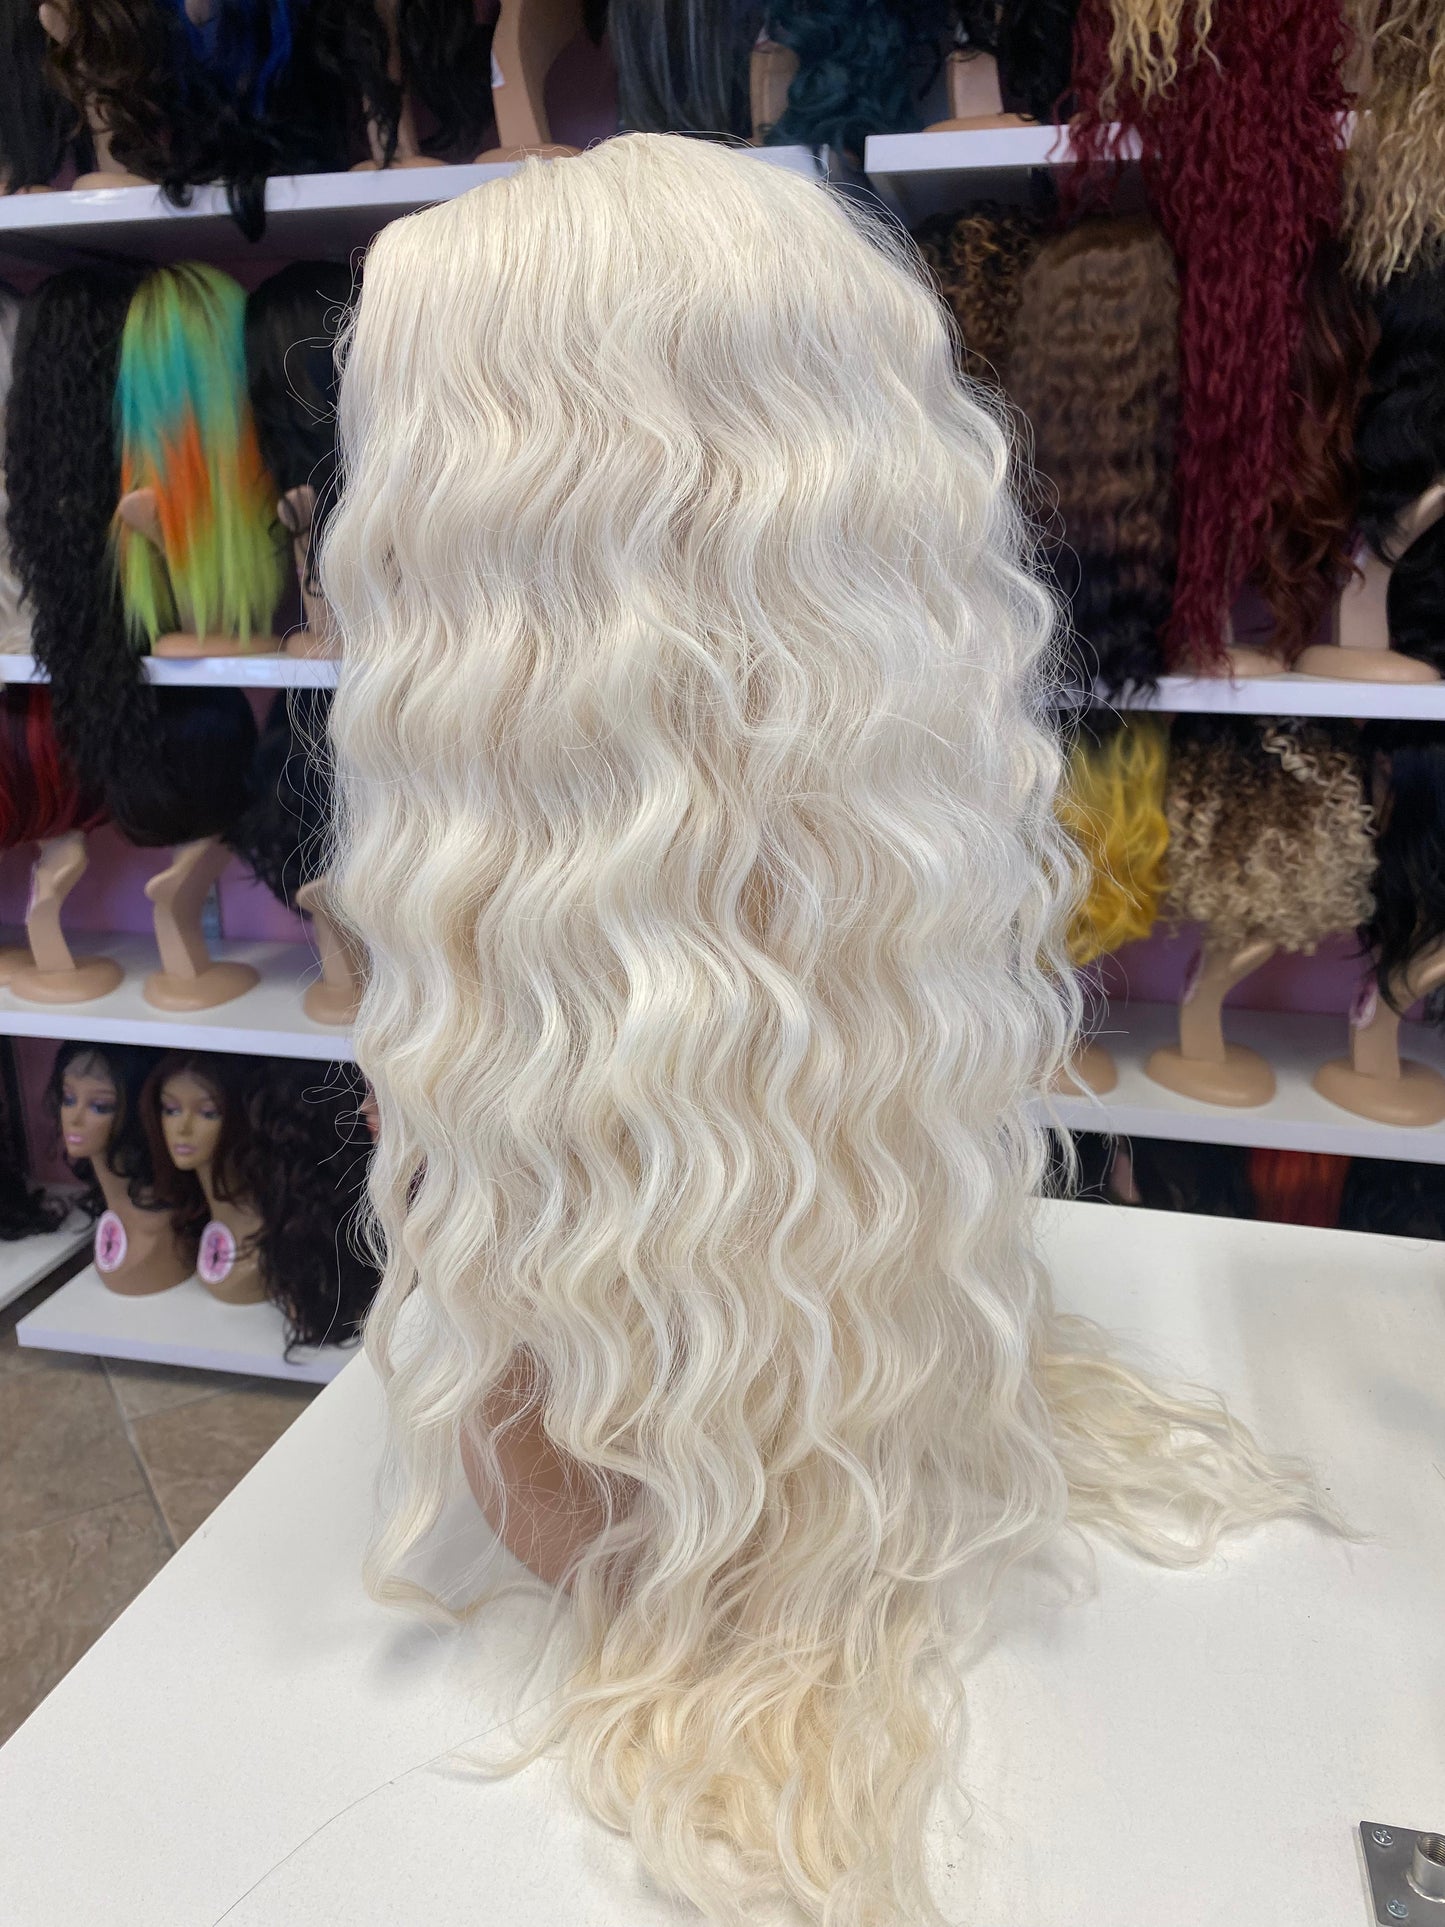 Marina - Deep Middle Part Lace Front Wig - 613B - DaizyKat Cosmetics Marina - Deep Middle Part Lace Front Wig - 613B DaizyKat Cosmetics Wigs